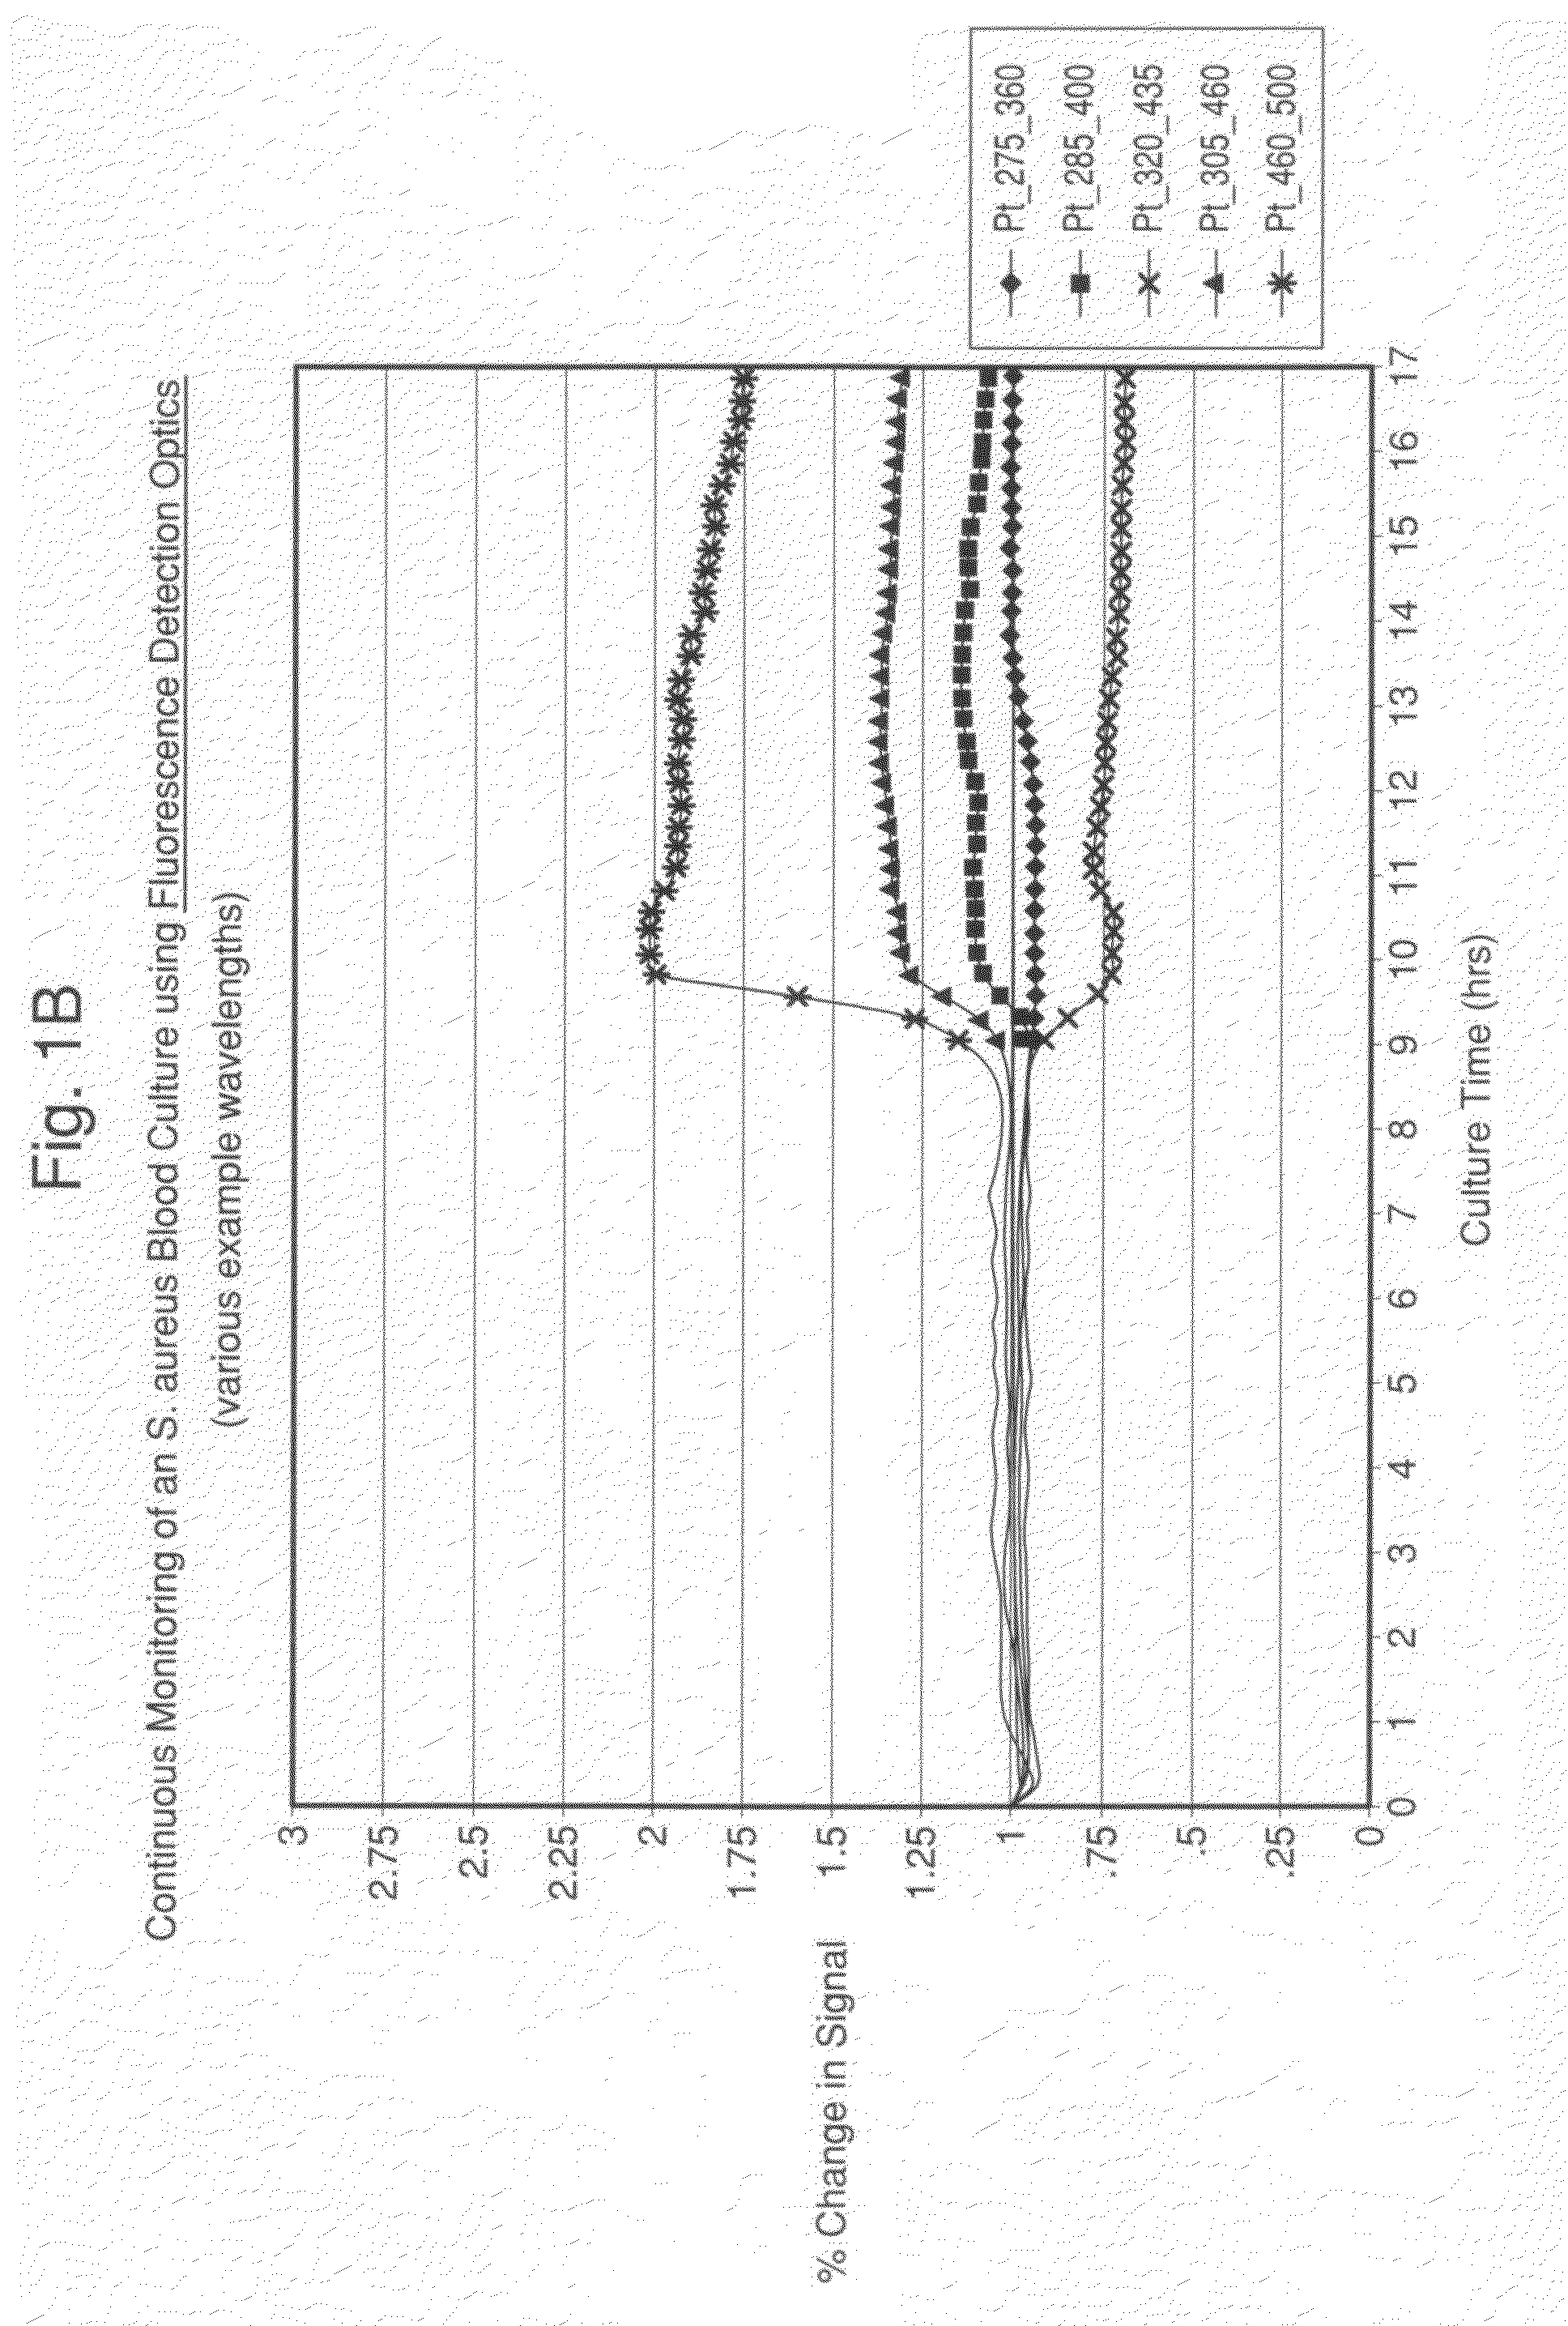 Method and system for detection and/or characterization of a biological particle in a sample